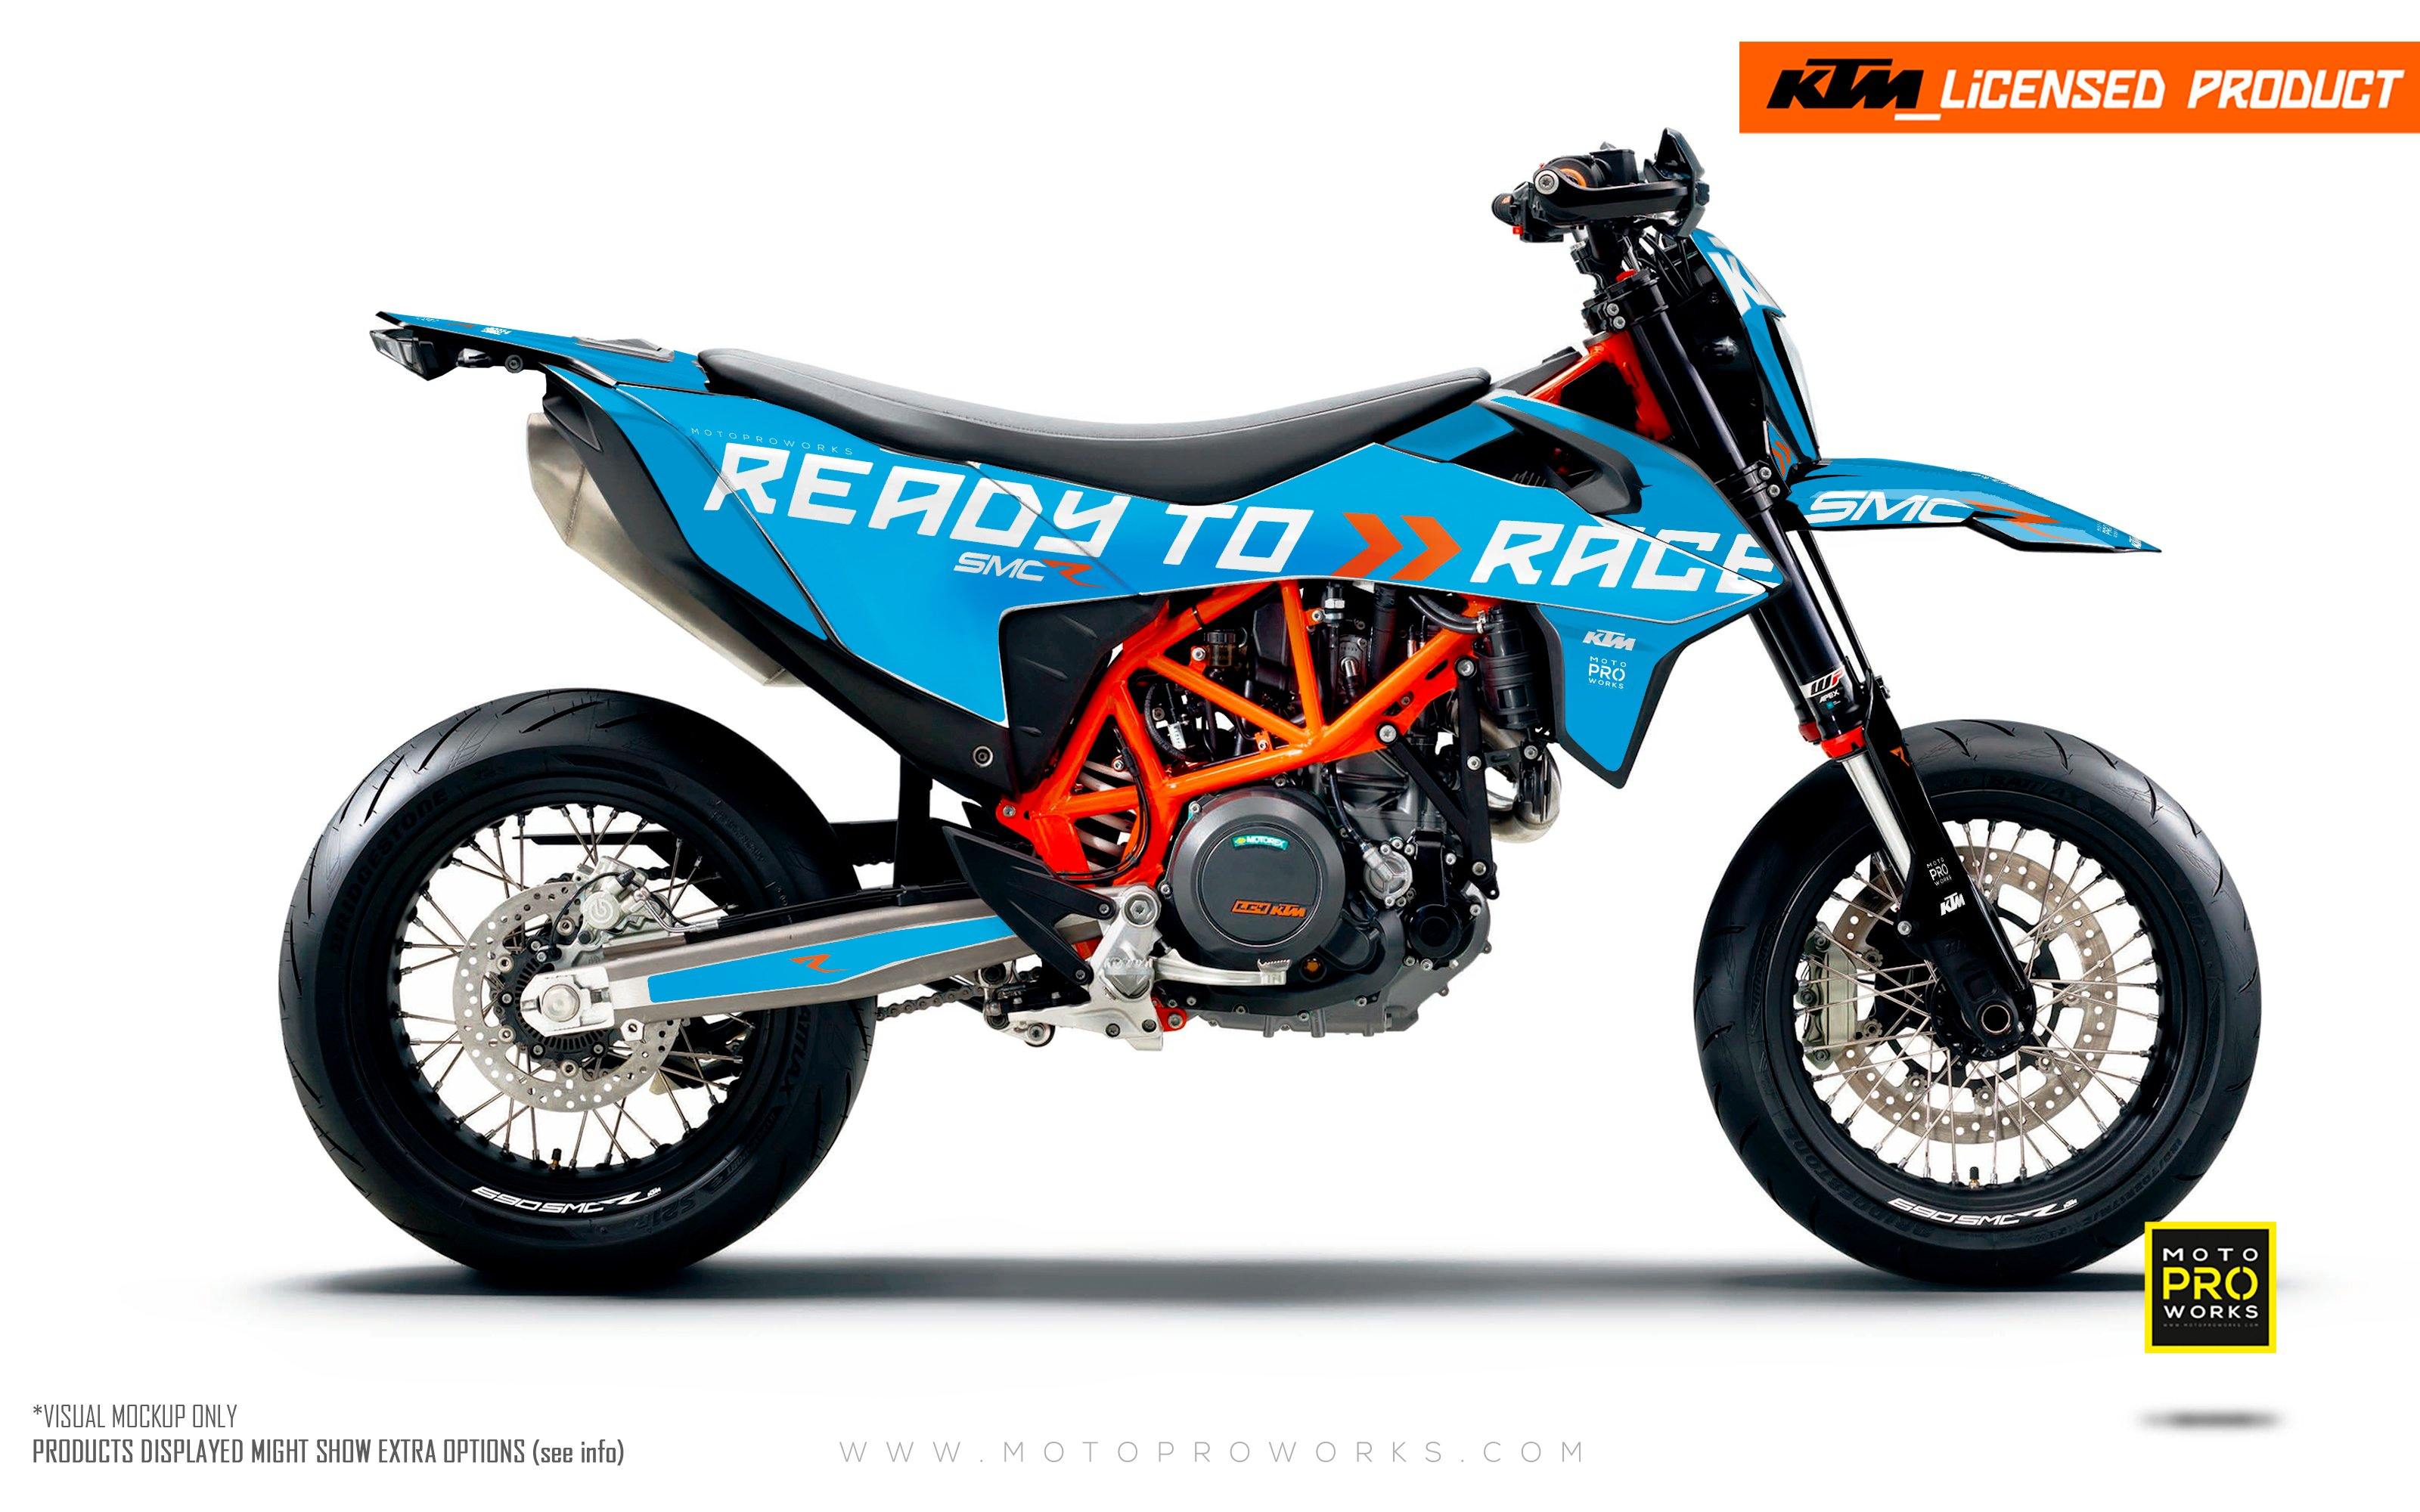 KTM GRAPHIC KIT - 690 SMC-R "Ready2Race" (Blue) - MotoProWorks | Decals and Bike Graphic kit